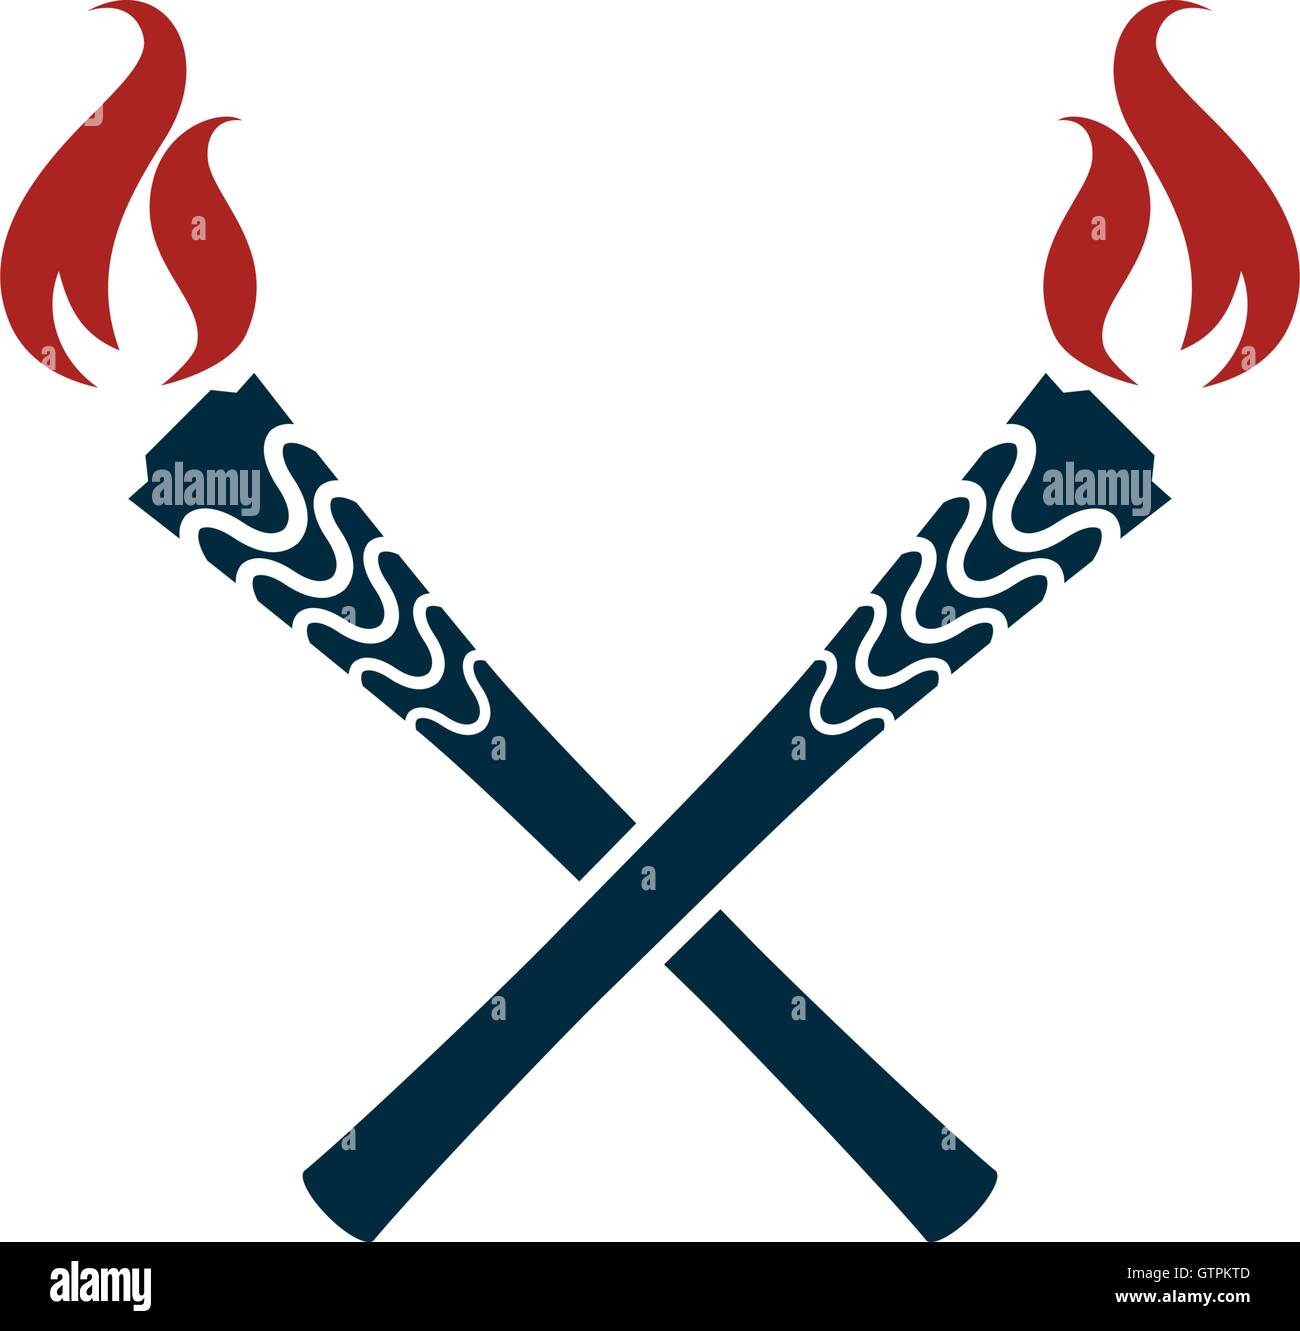 Torch vector icon isolated. Olympic fire. Flambeau flat style logo